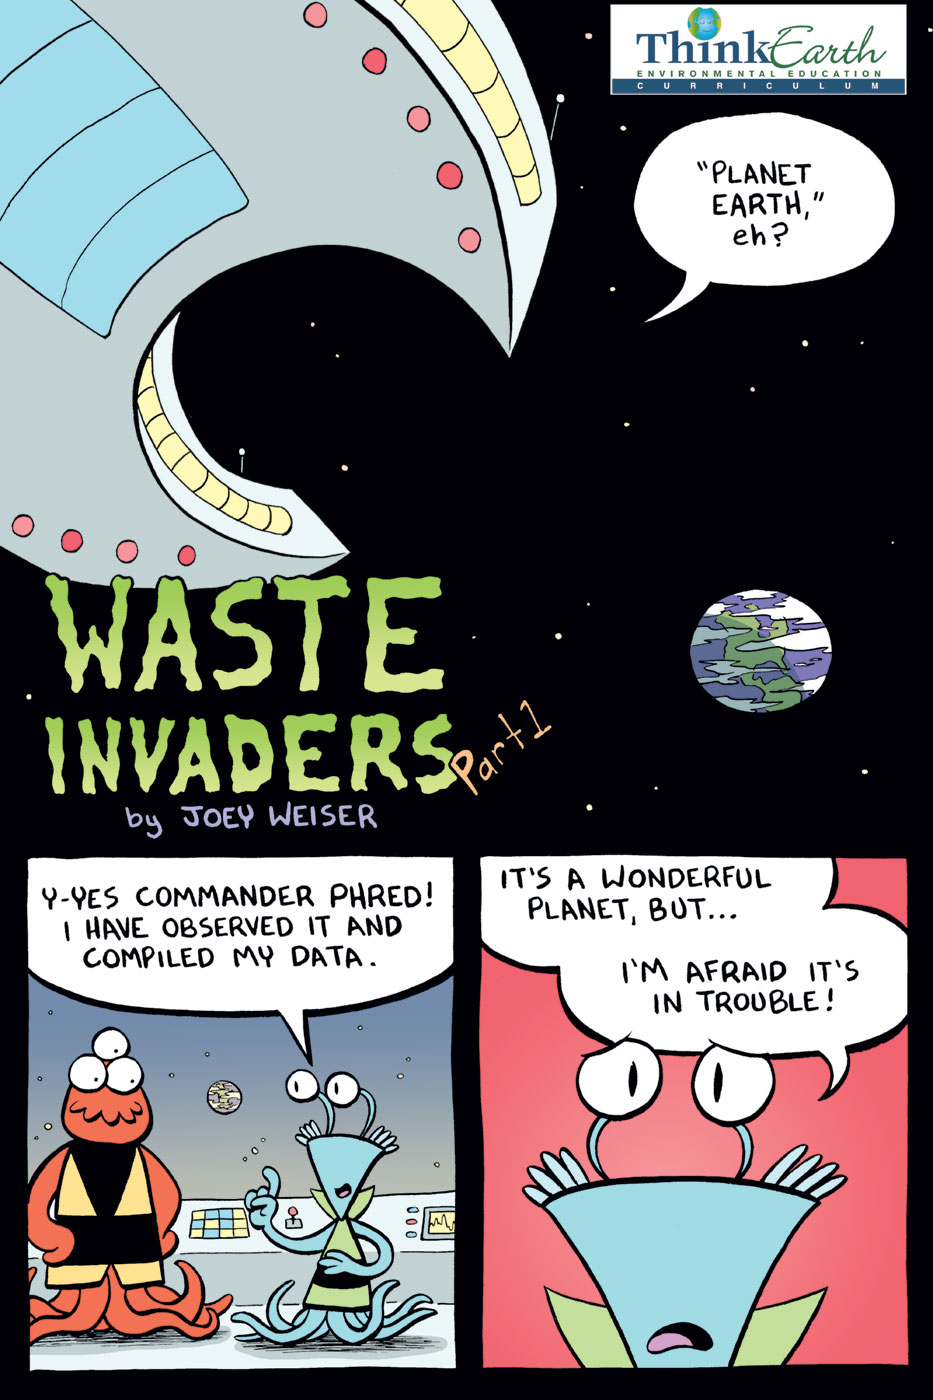 Cover page for Waste Invaders comic. Features a spaceship approaching earth with a speech bubble that reads: "Planet Earth, eh?" The title is printed below in a green font, and a small panel lines the bottom of the image showcasing two aliens discussing a negative prognosis for our planet.